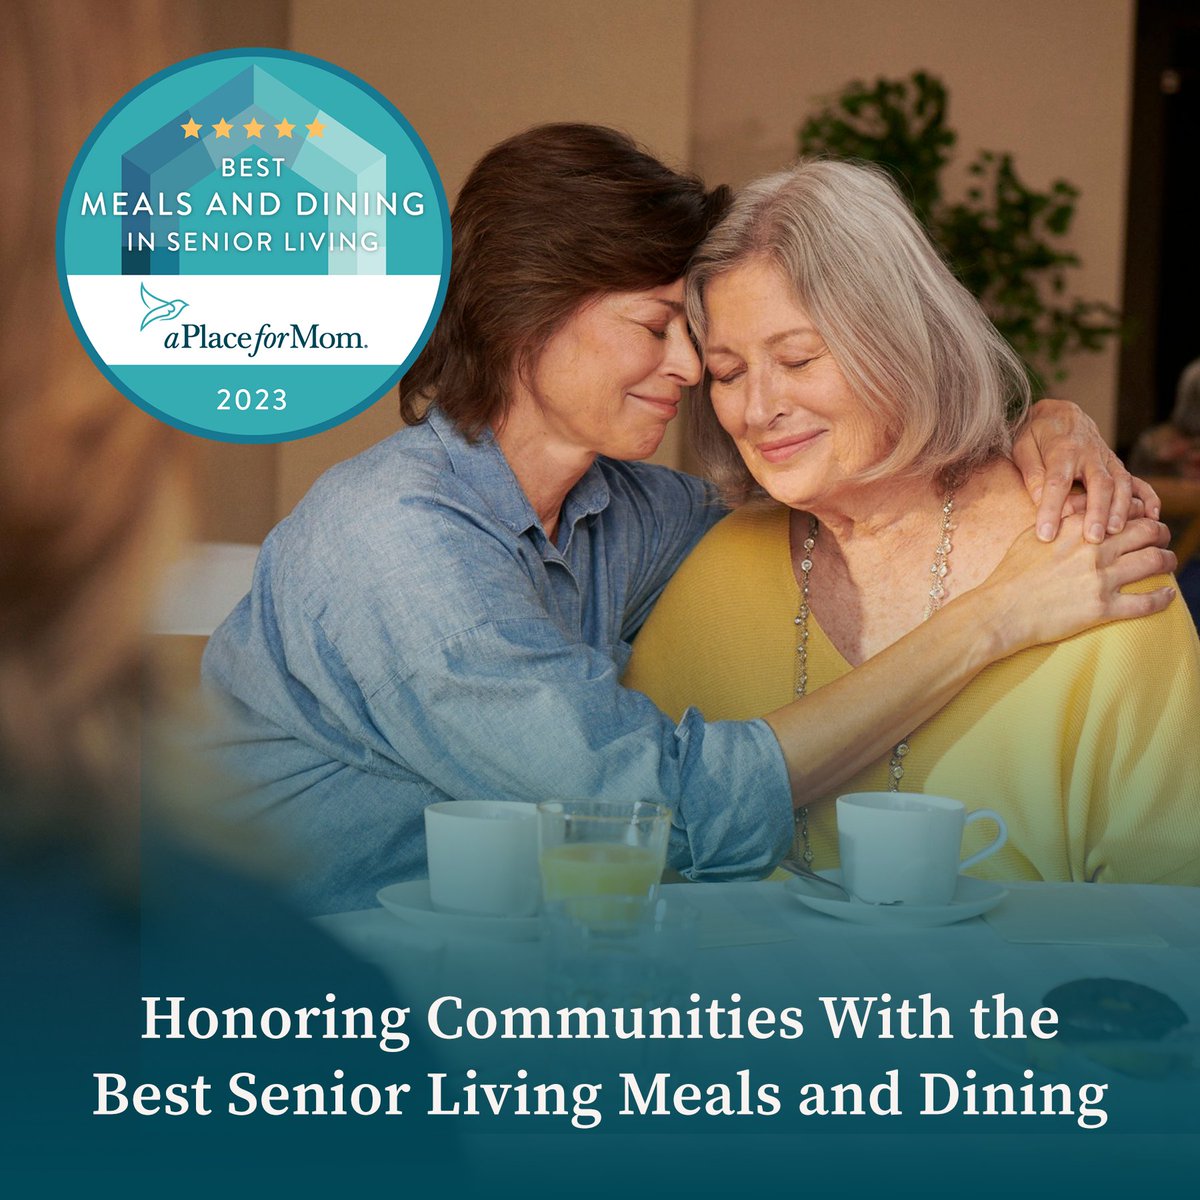 We’re thrilled to announce the top-rated communities awarded “Best Meals and Dining in Senior Living 2023”. ⁣⁣We know finding a community that prioritizes healthy and delicious meals can provide peace of mind for both residents and their families. aplaceformom.com/awards/best-me…